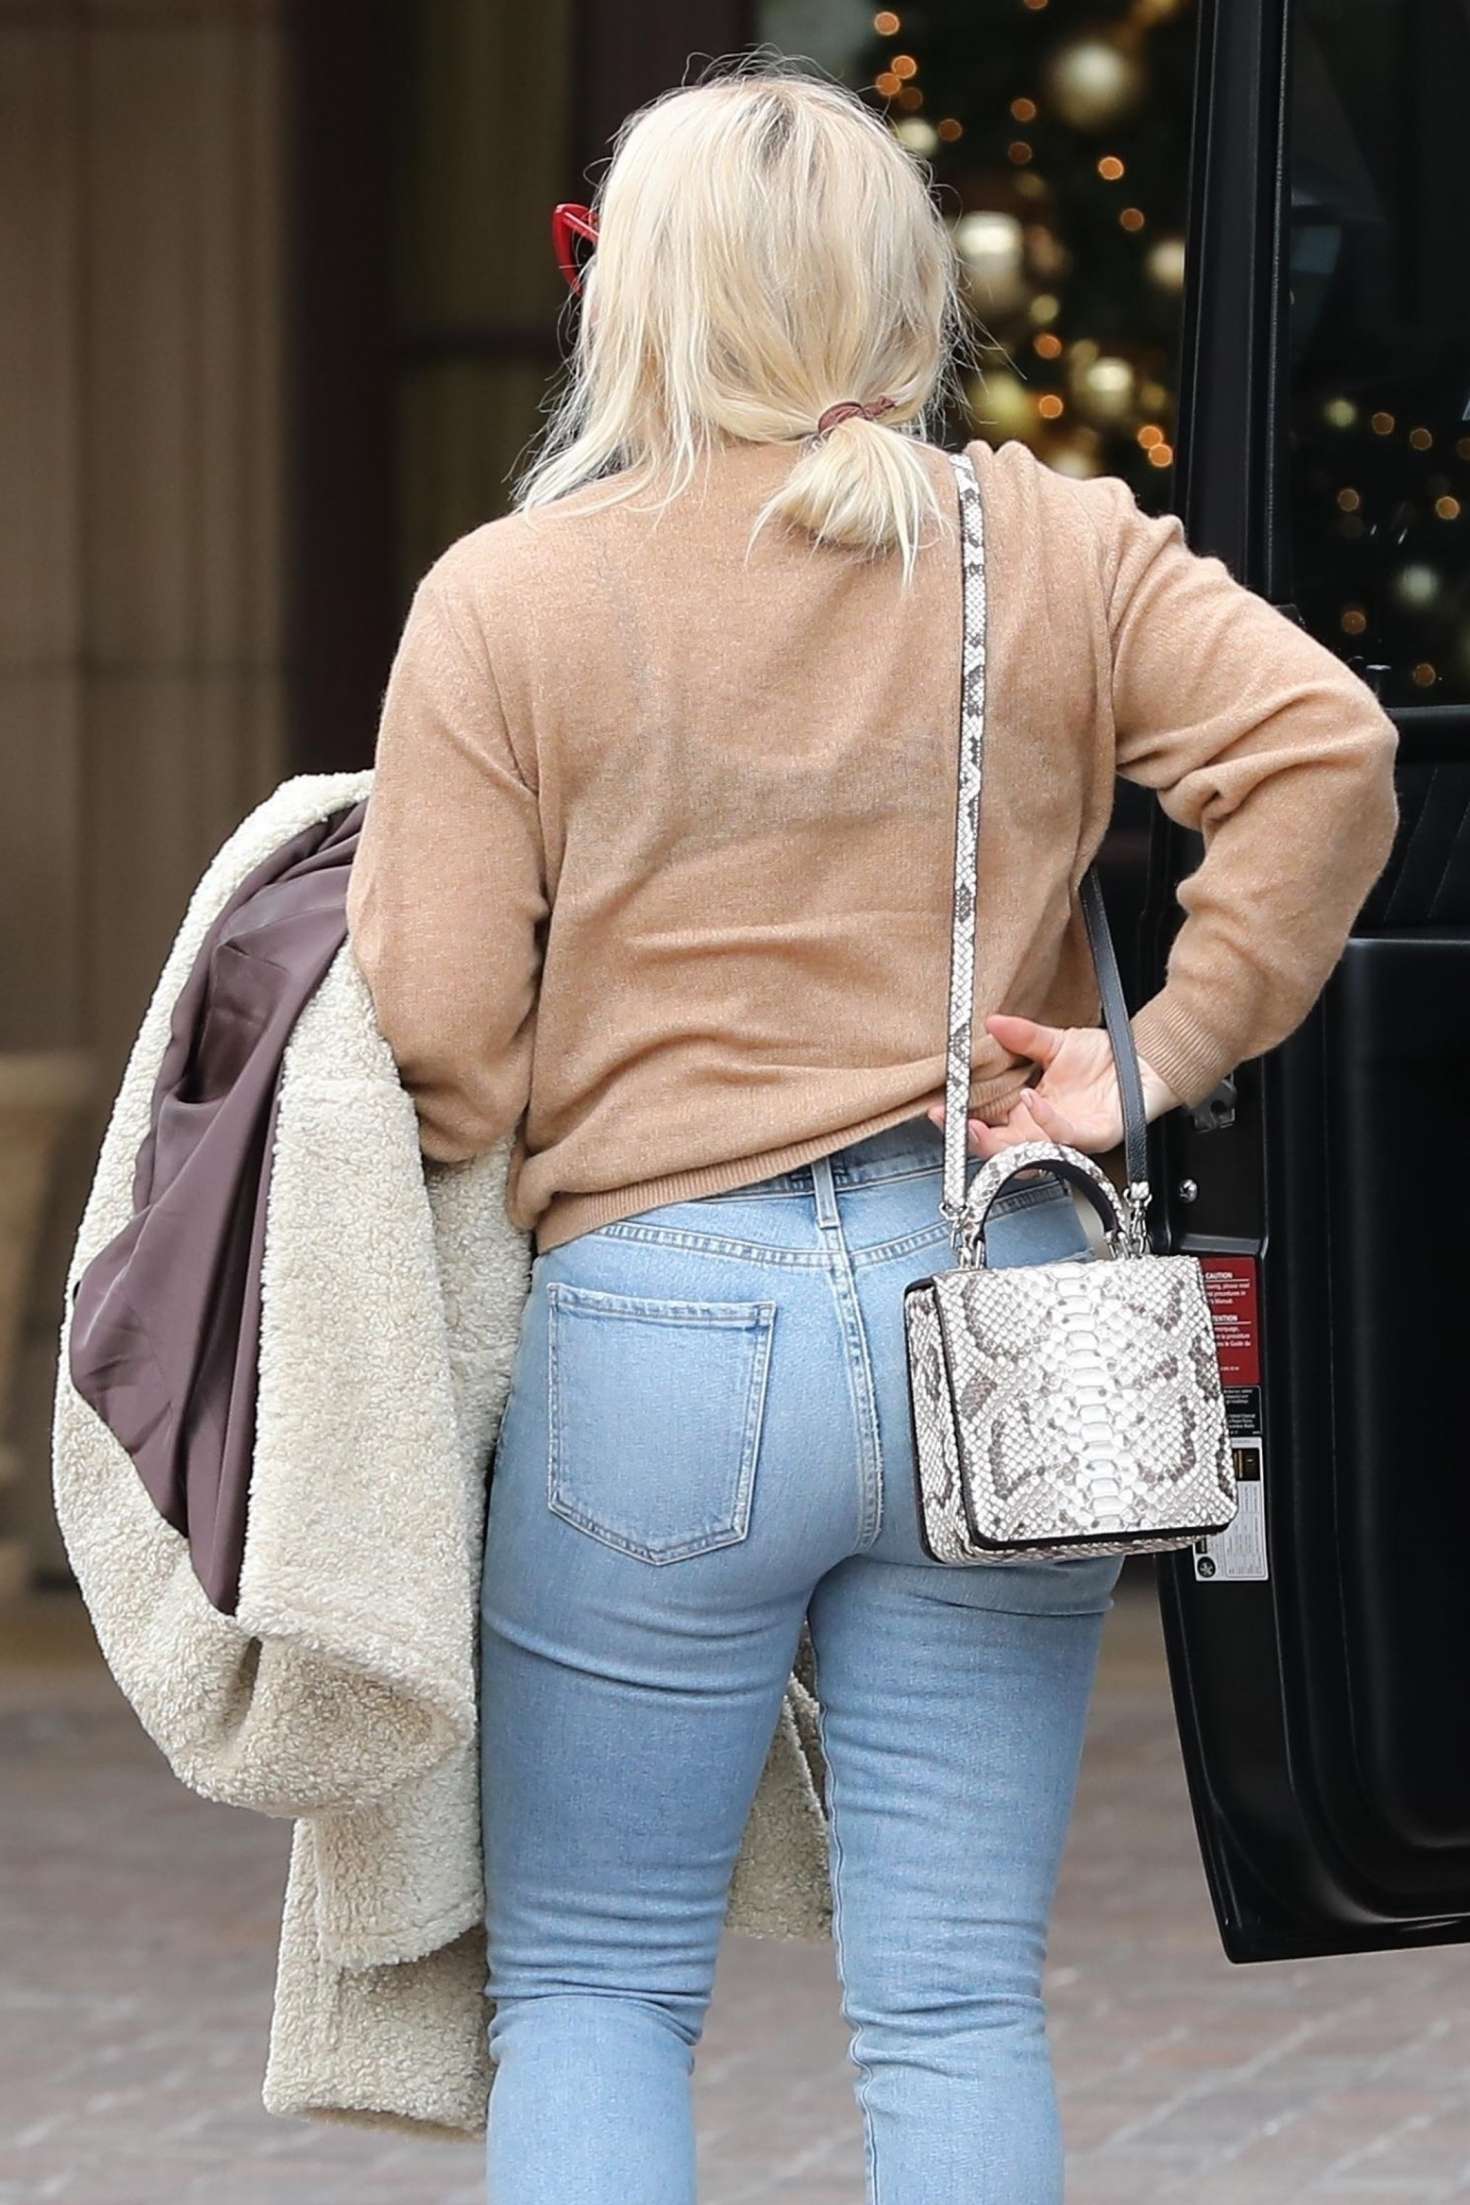 Hilary Duff in Tight Jeans out in Beverly Hills. 